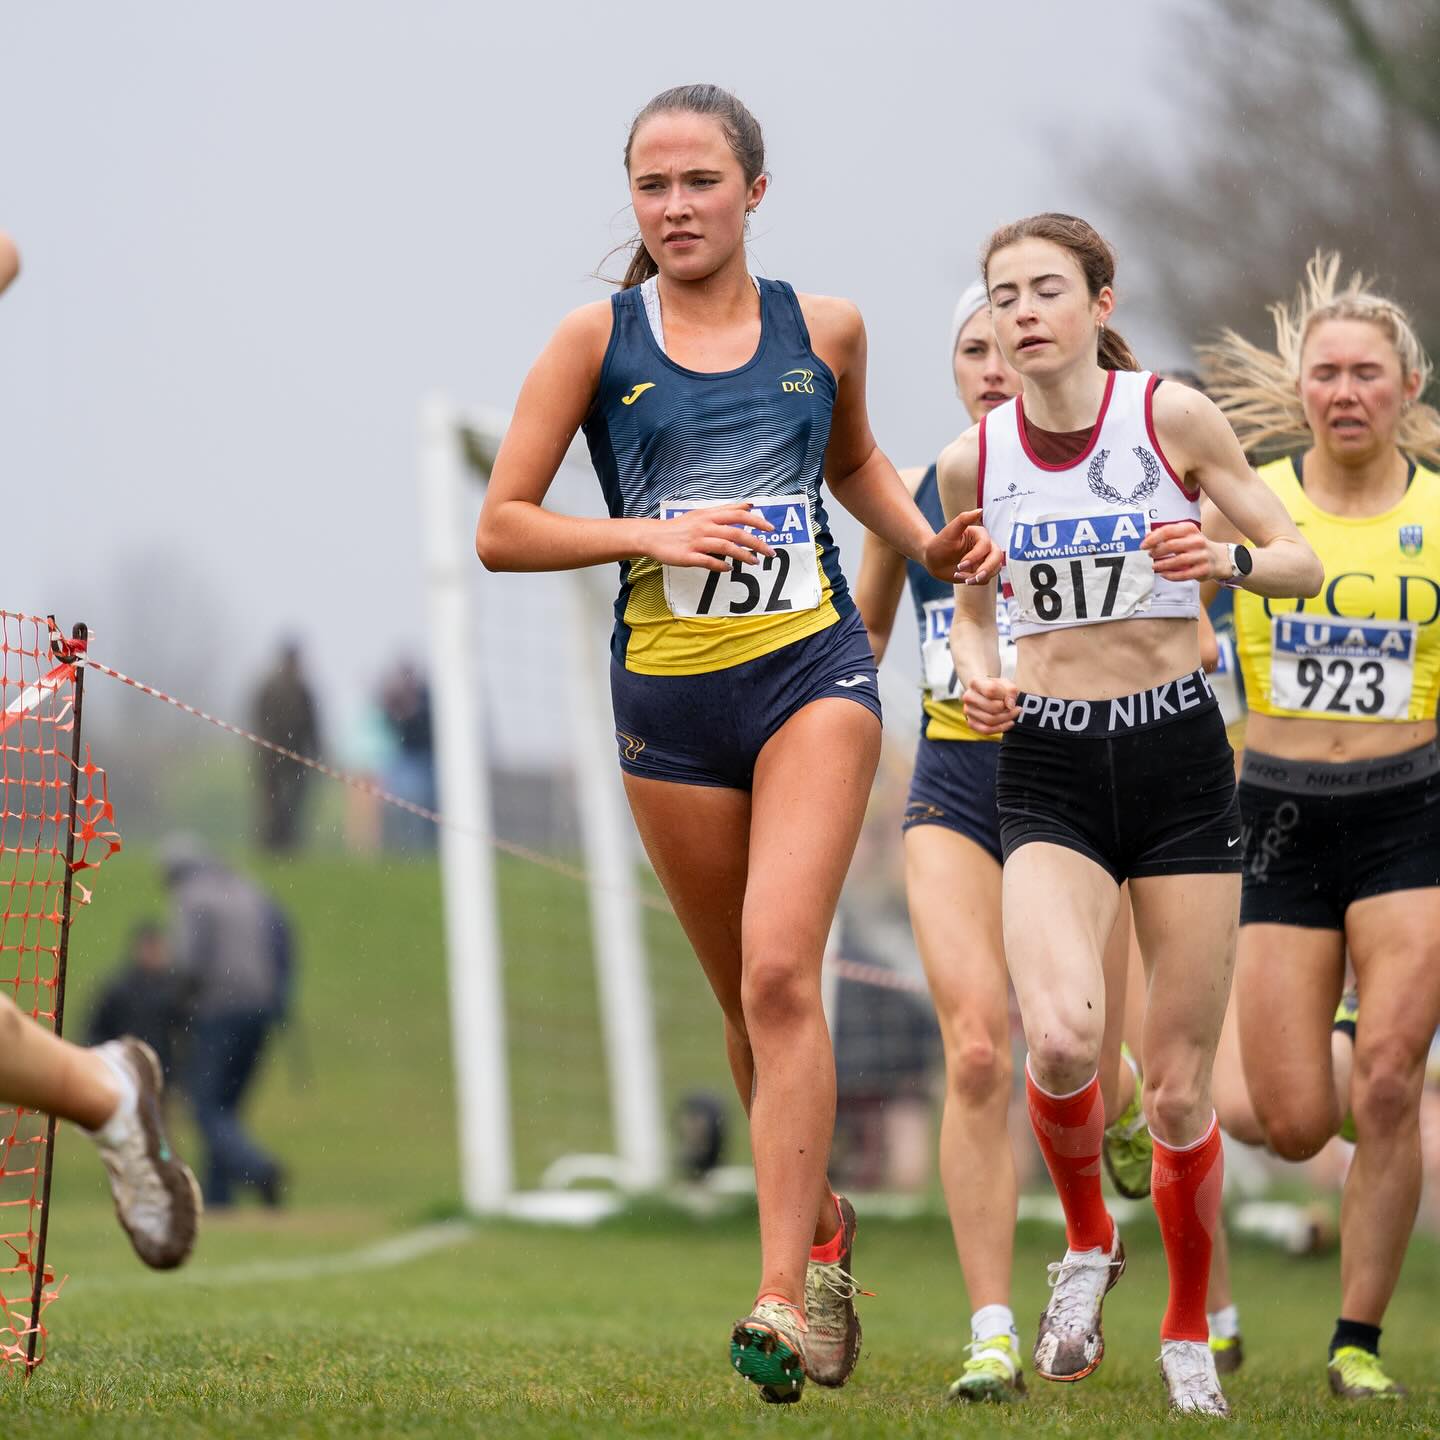 Roberts and Murphy top individual podium as TCD and UL take team honours